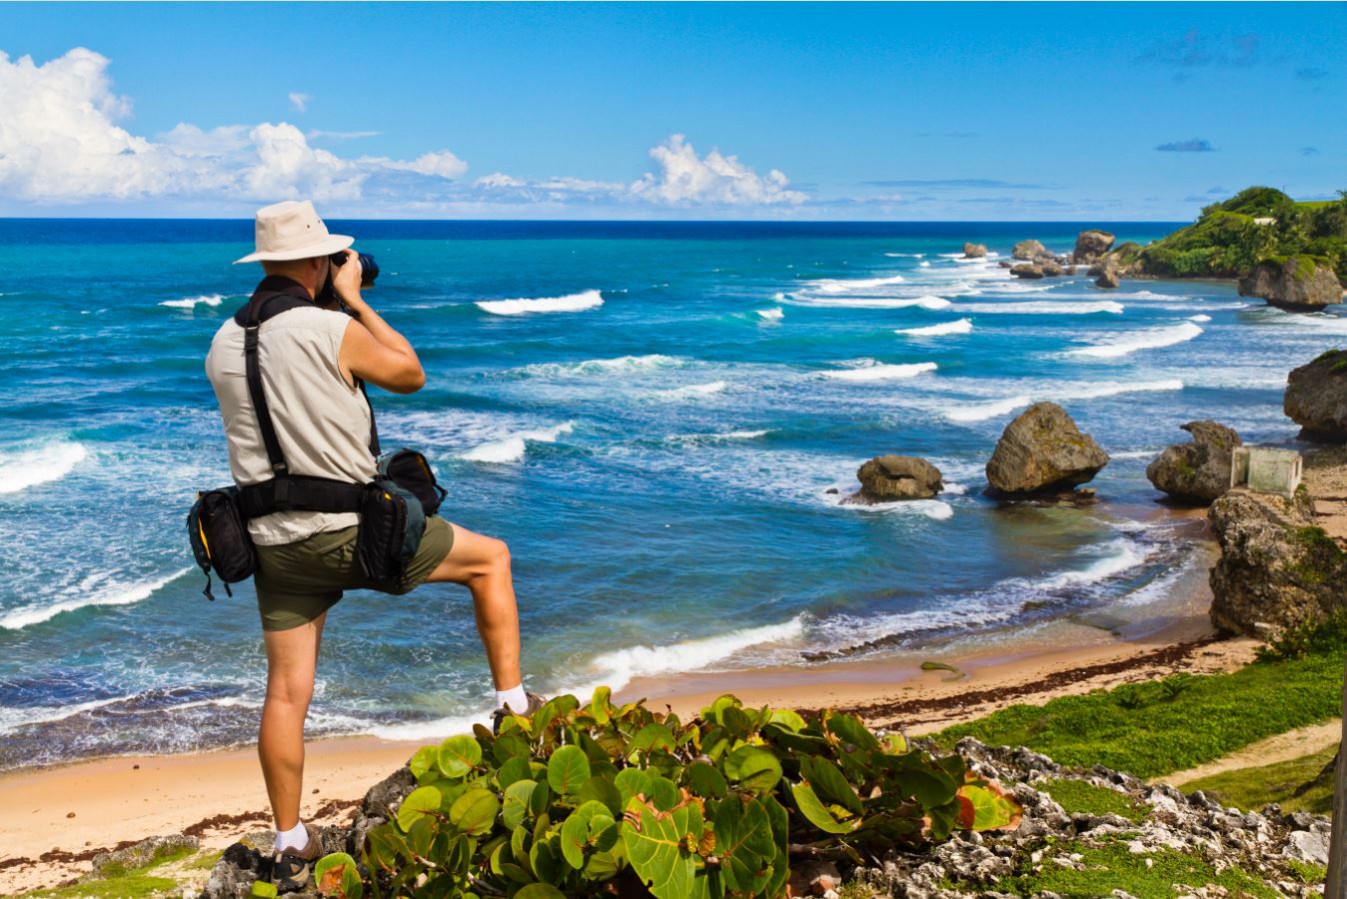 Hiking in Barbados - Things to do in Barbados